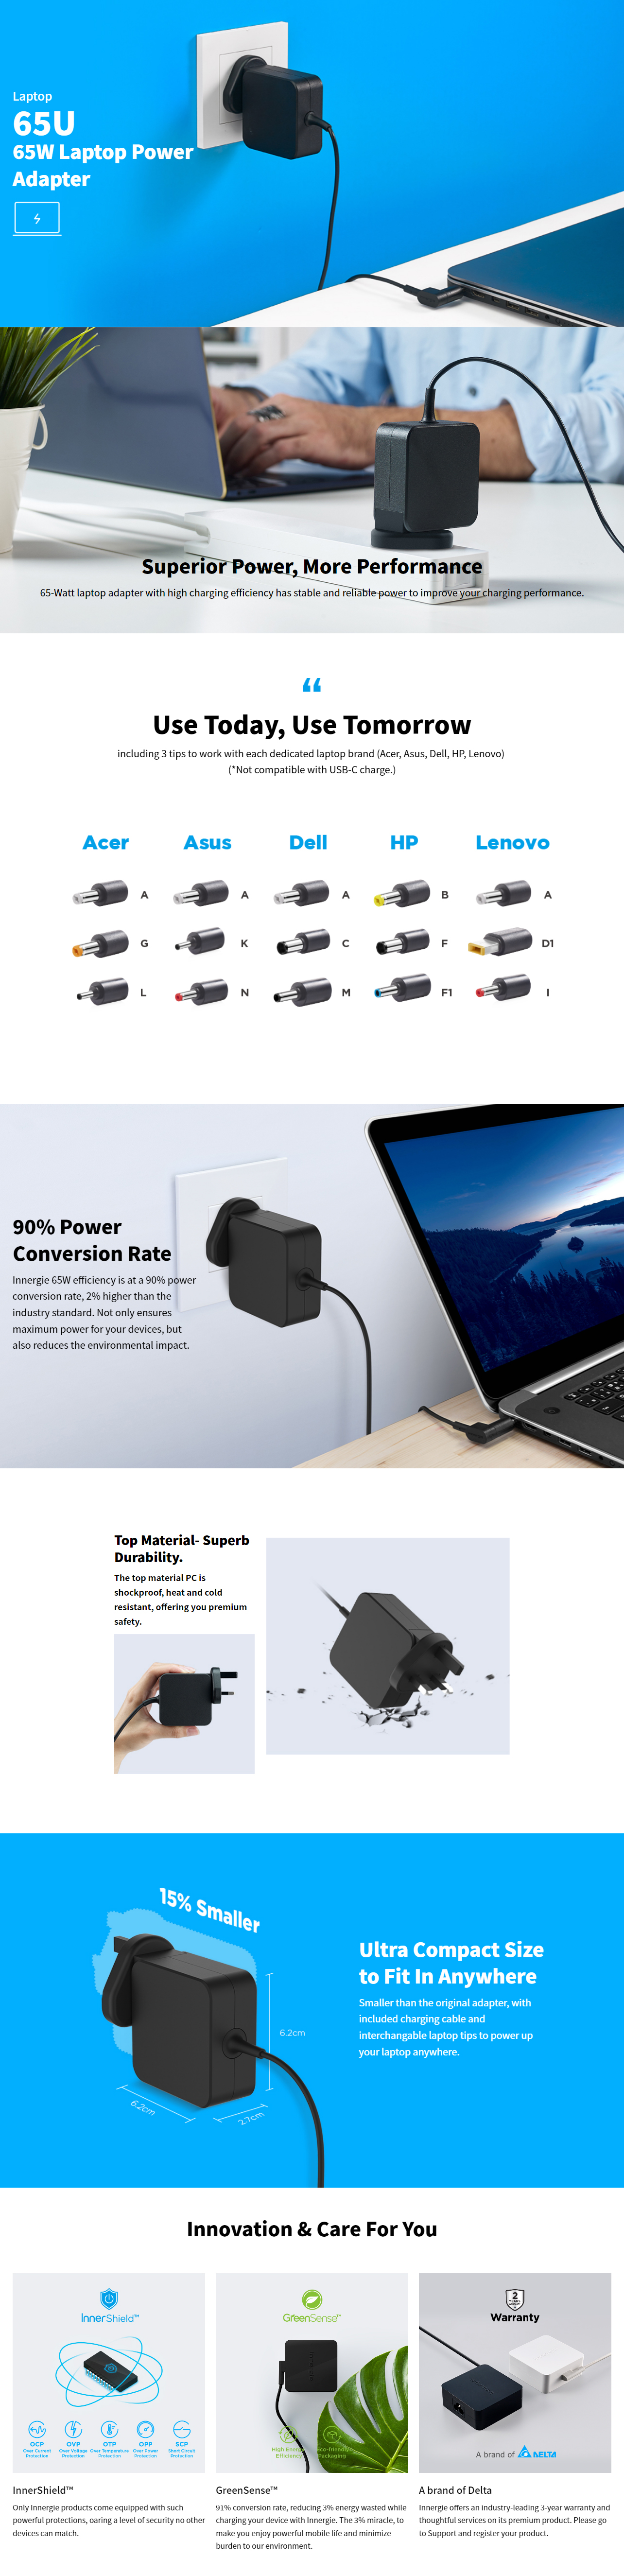 Laptop-Accessories-Innergie-65W-Laptop-Power-Adapter-for-Lenovo-3-tips-2